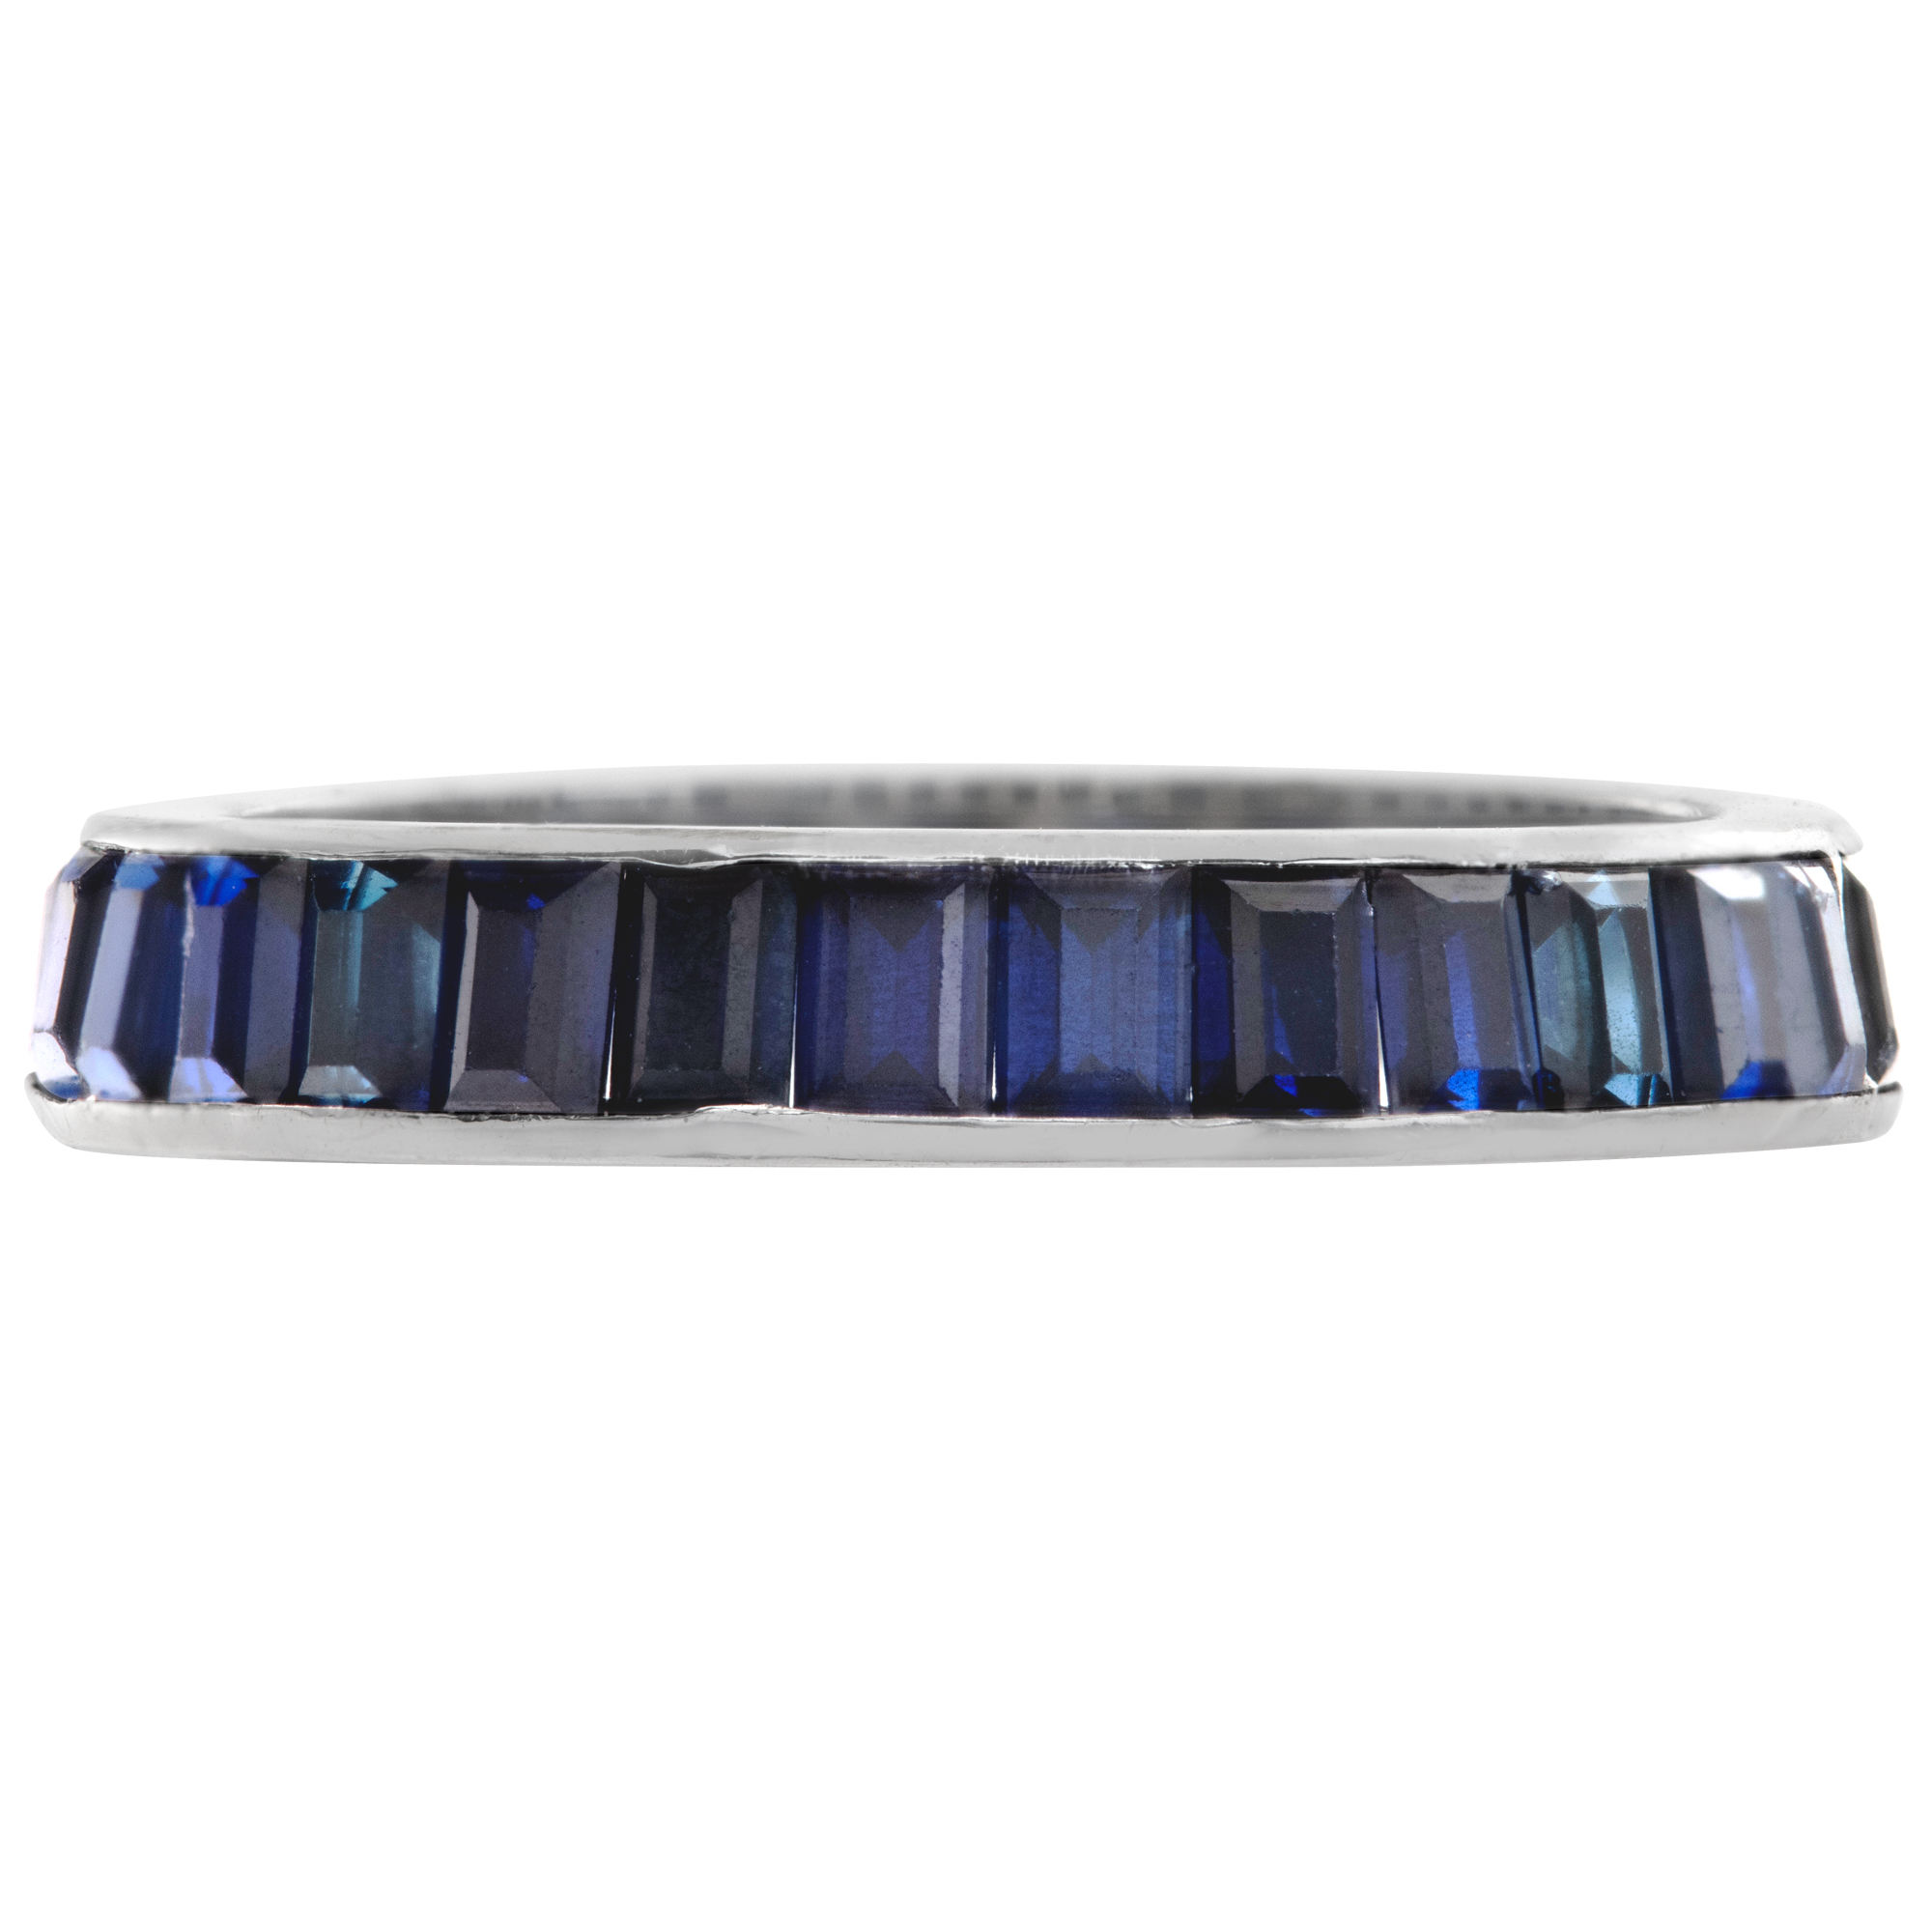 Sapphire wedding band in 14k white gold with approx 1.5 cts in blue sapphires